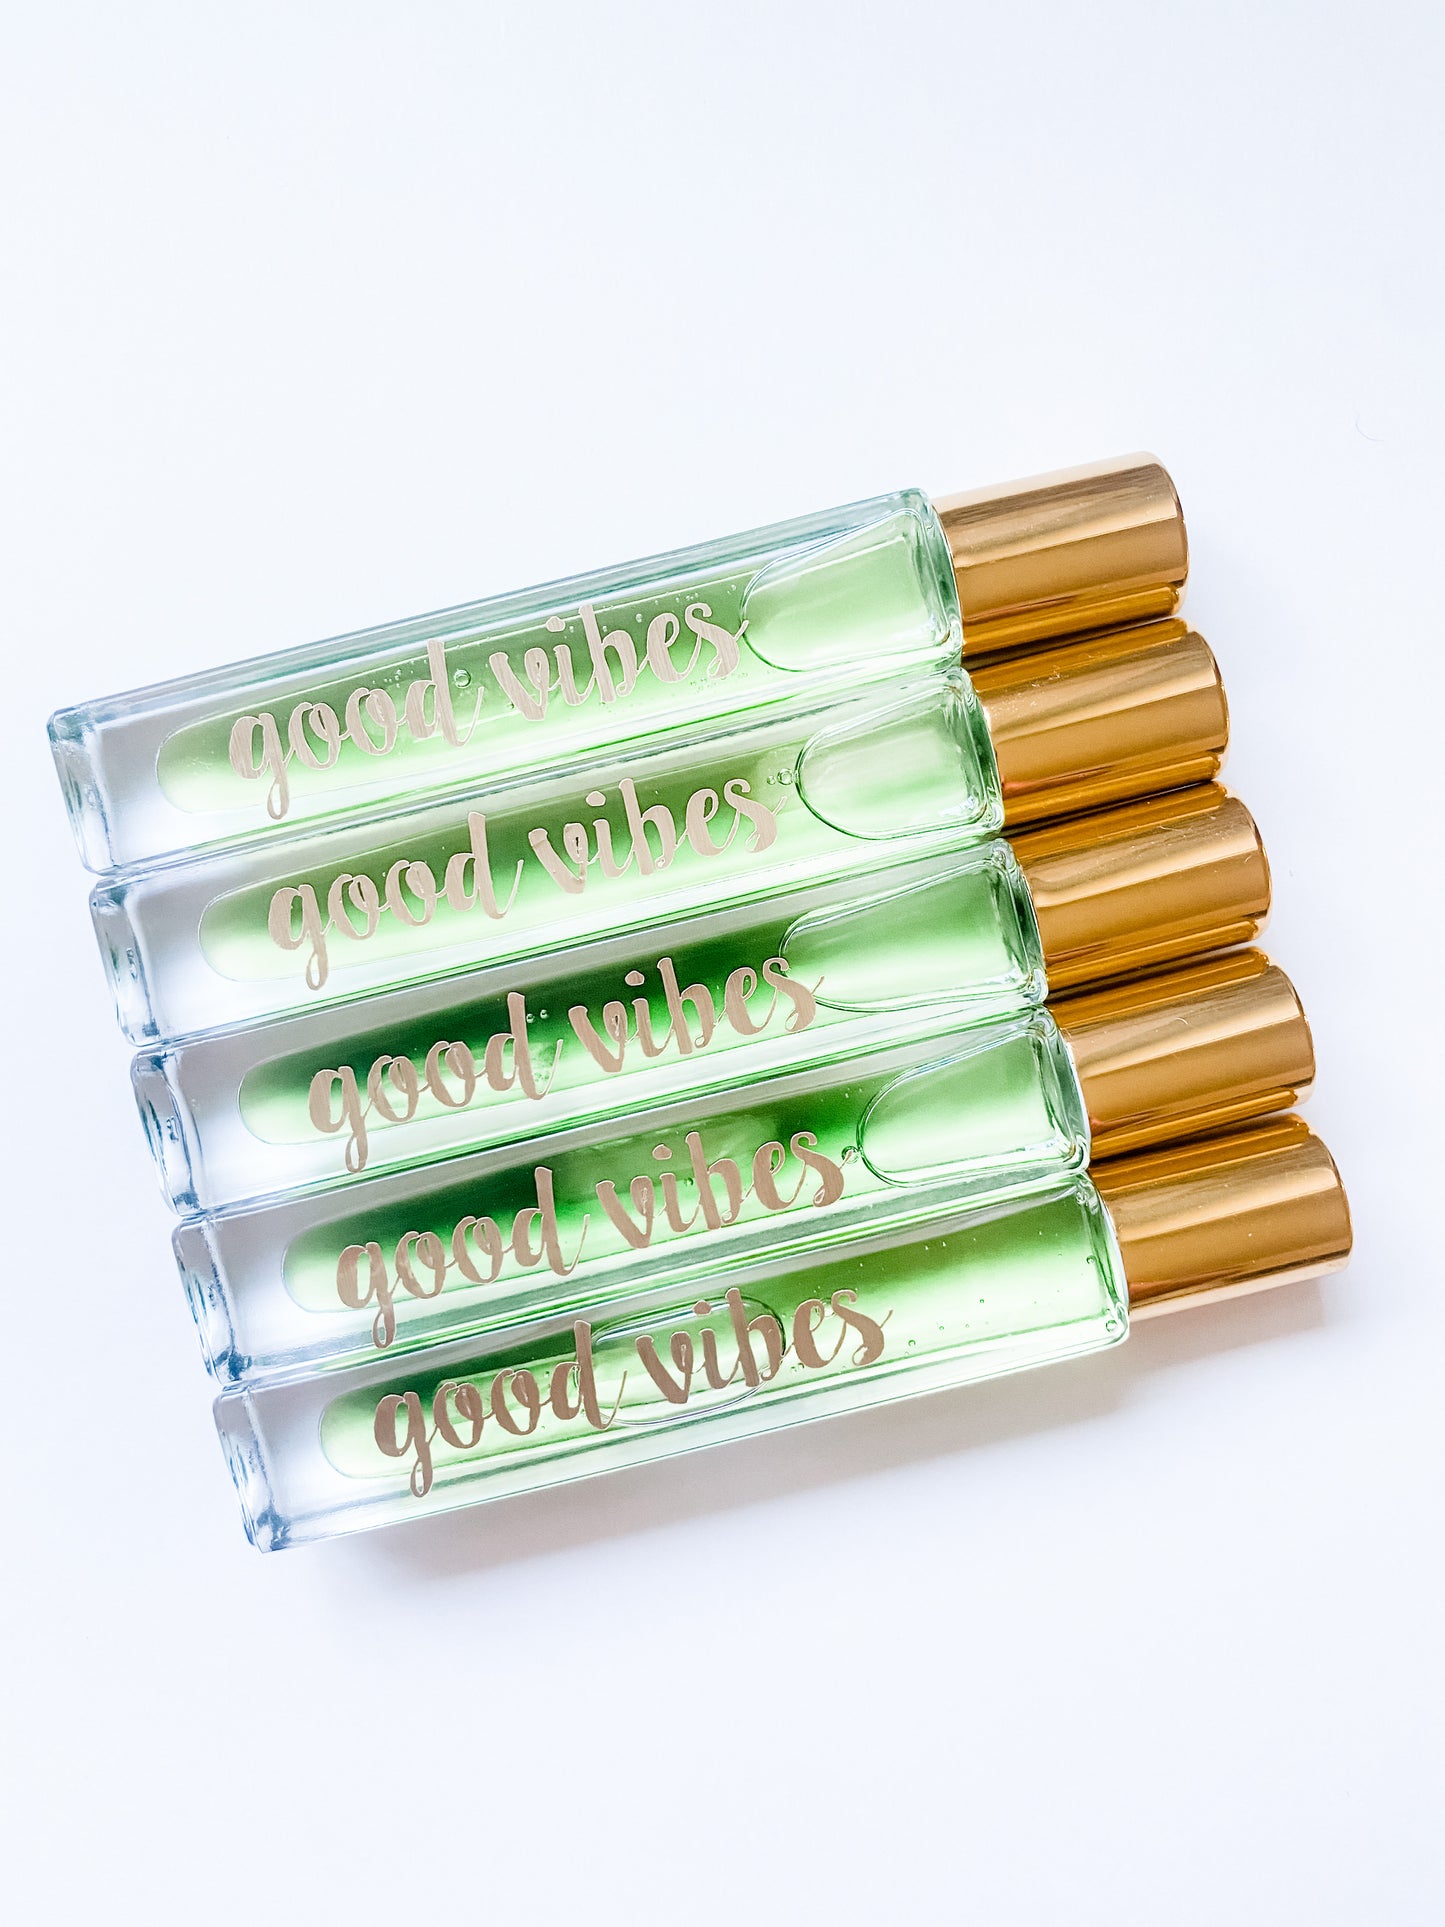 Good Vibes Crystal  Point Infused Roll-on Elixir